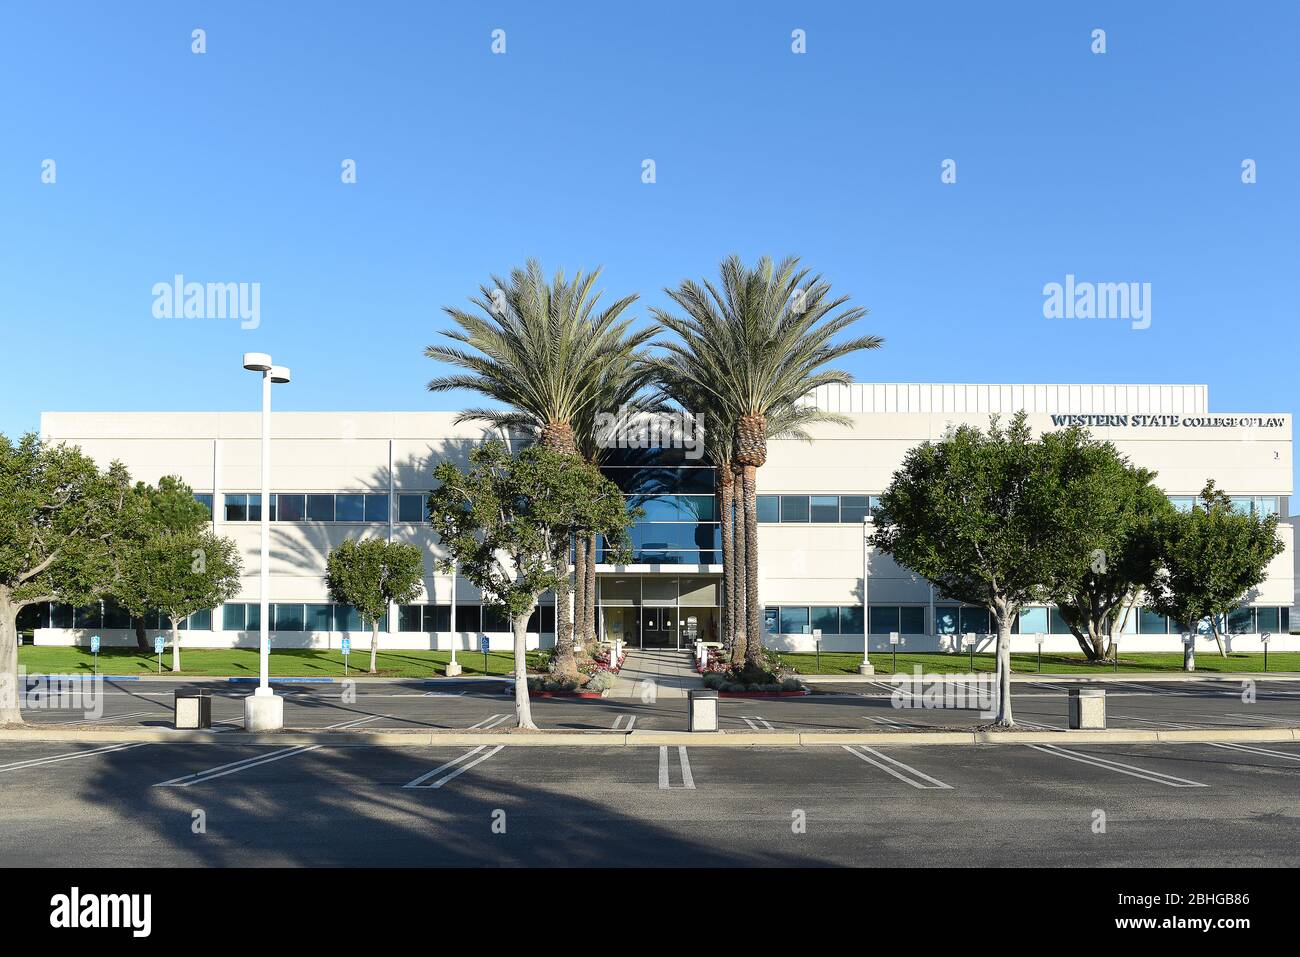 IRVINE, CALIFORNIA - 25 APRIL 2020: The Western State College of Law, Irvine campus. Stock Photo